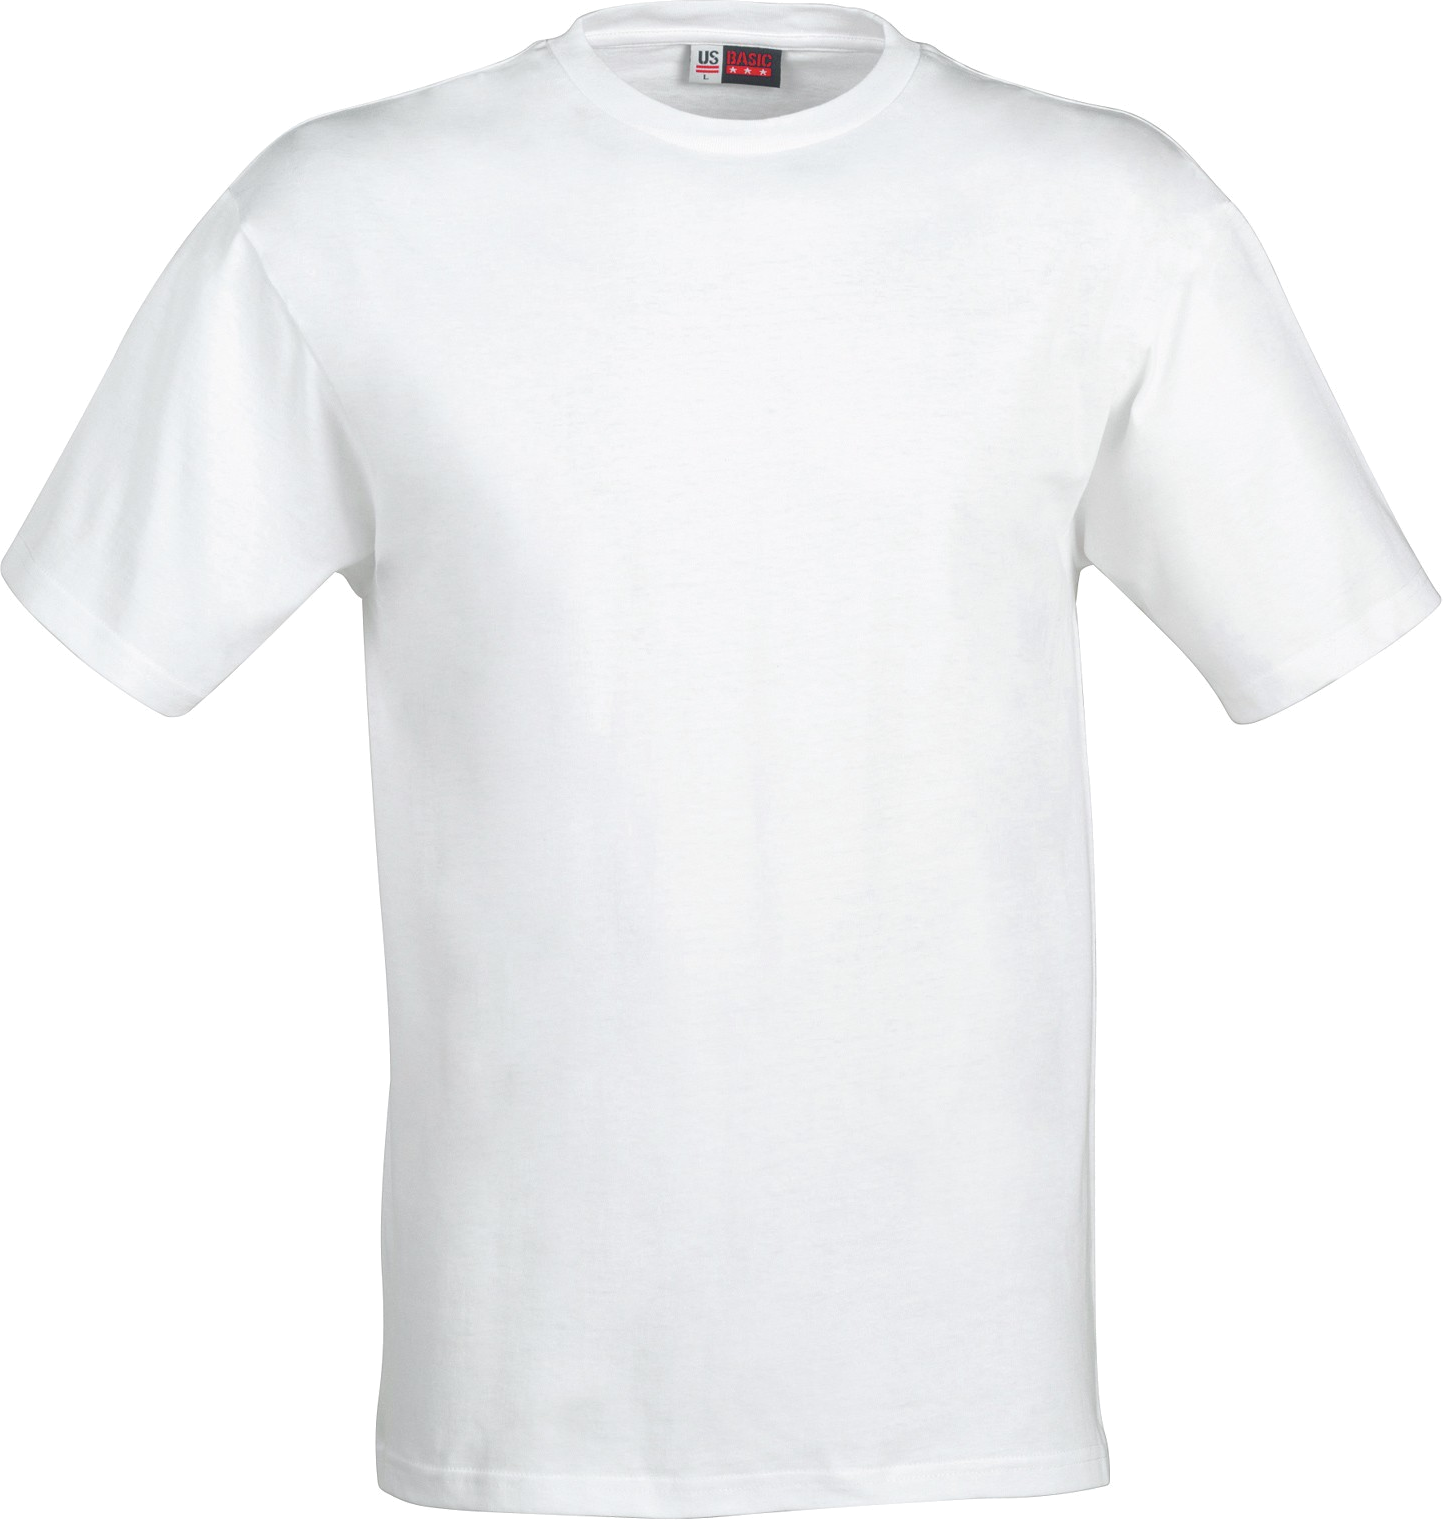 White T-Shirt PNG Image - PurePNG | Free transparent CC0 PNG Image Library